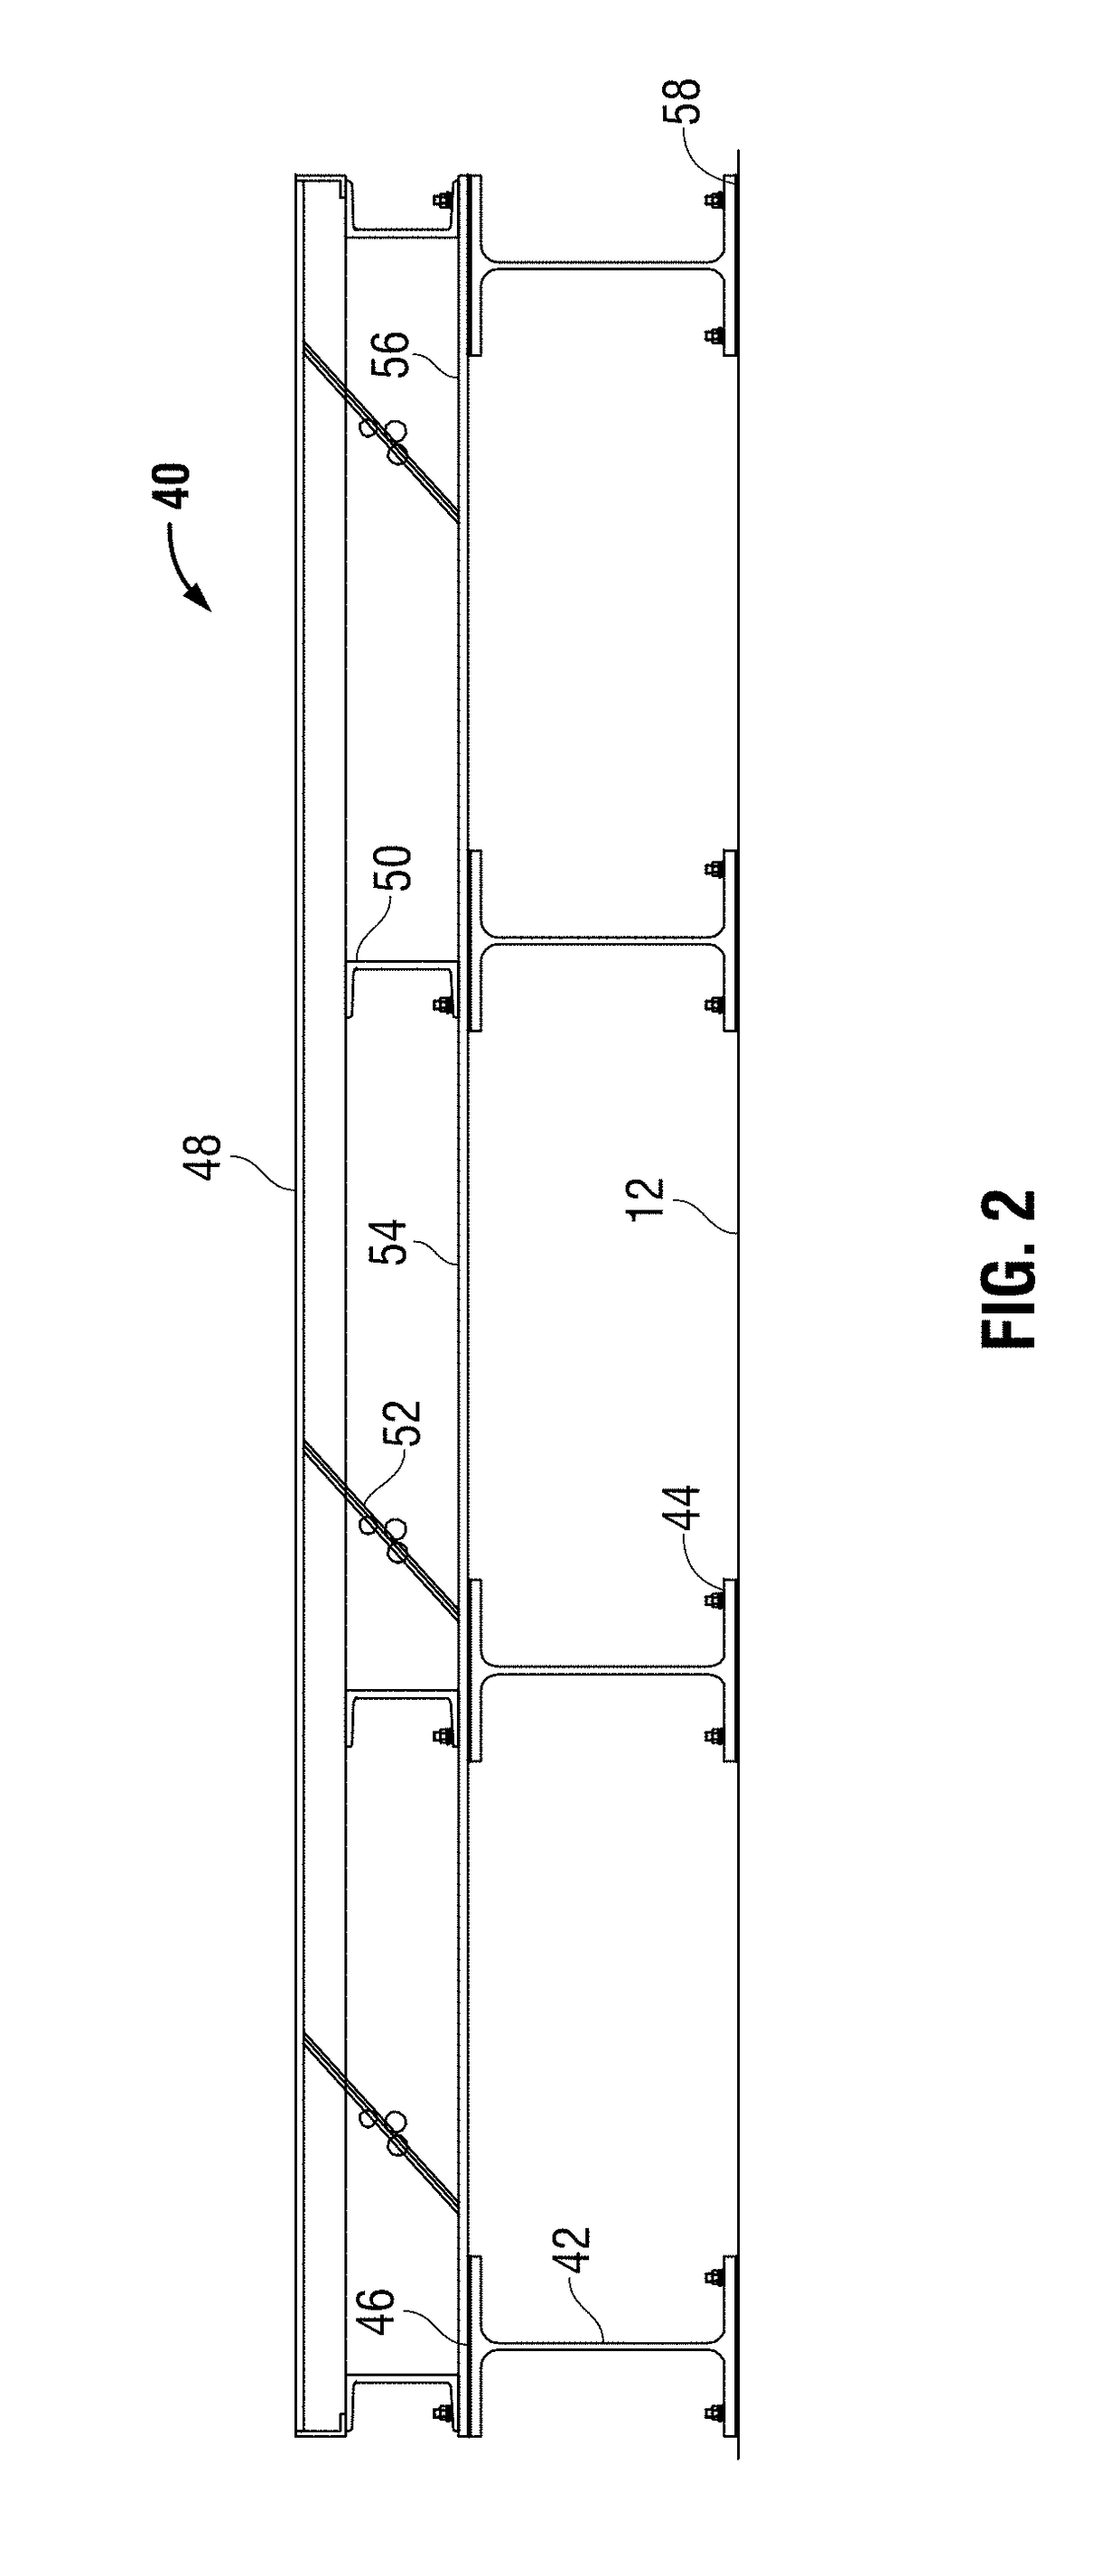 Method for improved semiconductor processing equipment tool pedestal / pad vibration isolation and reduction